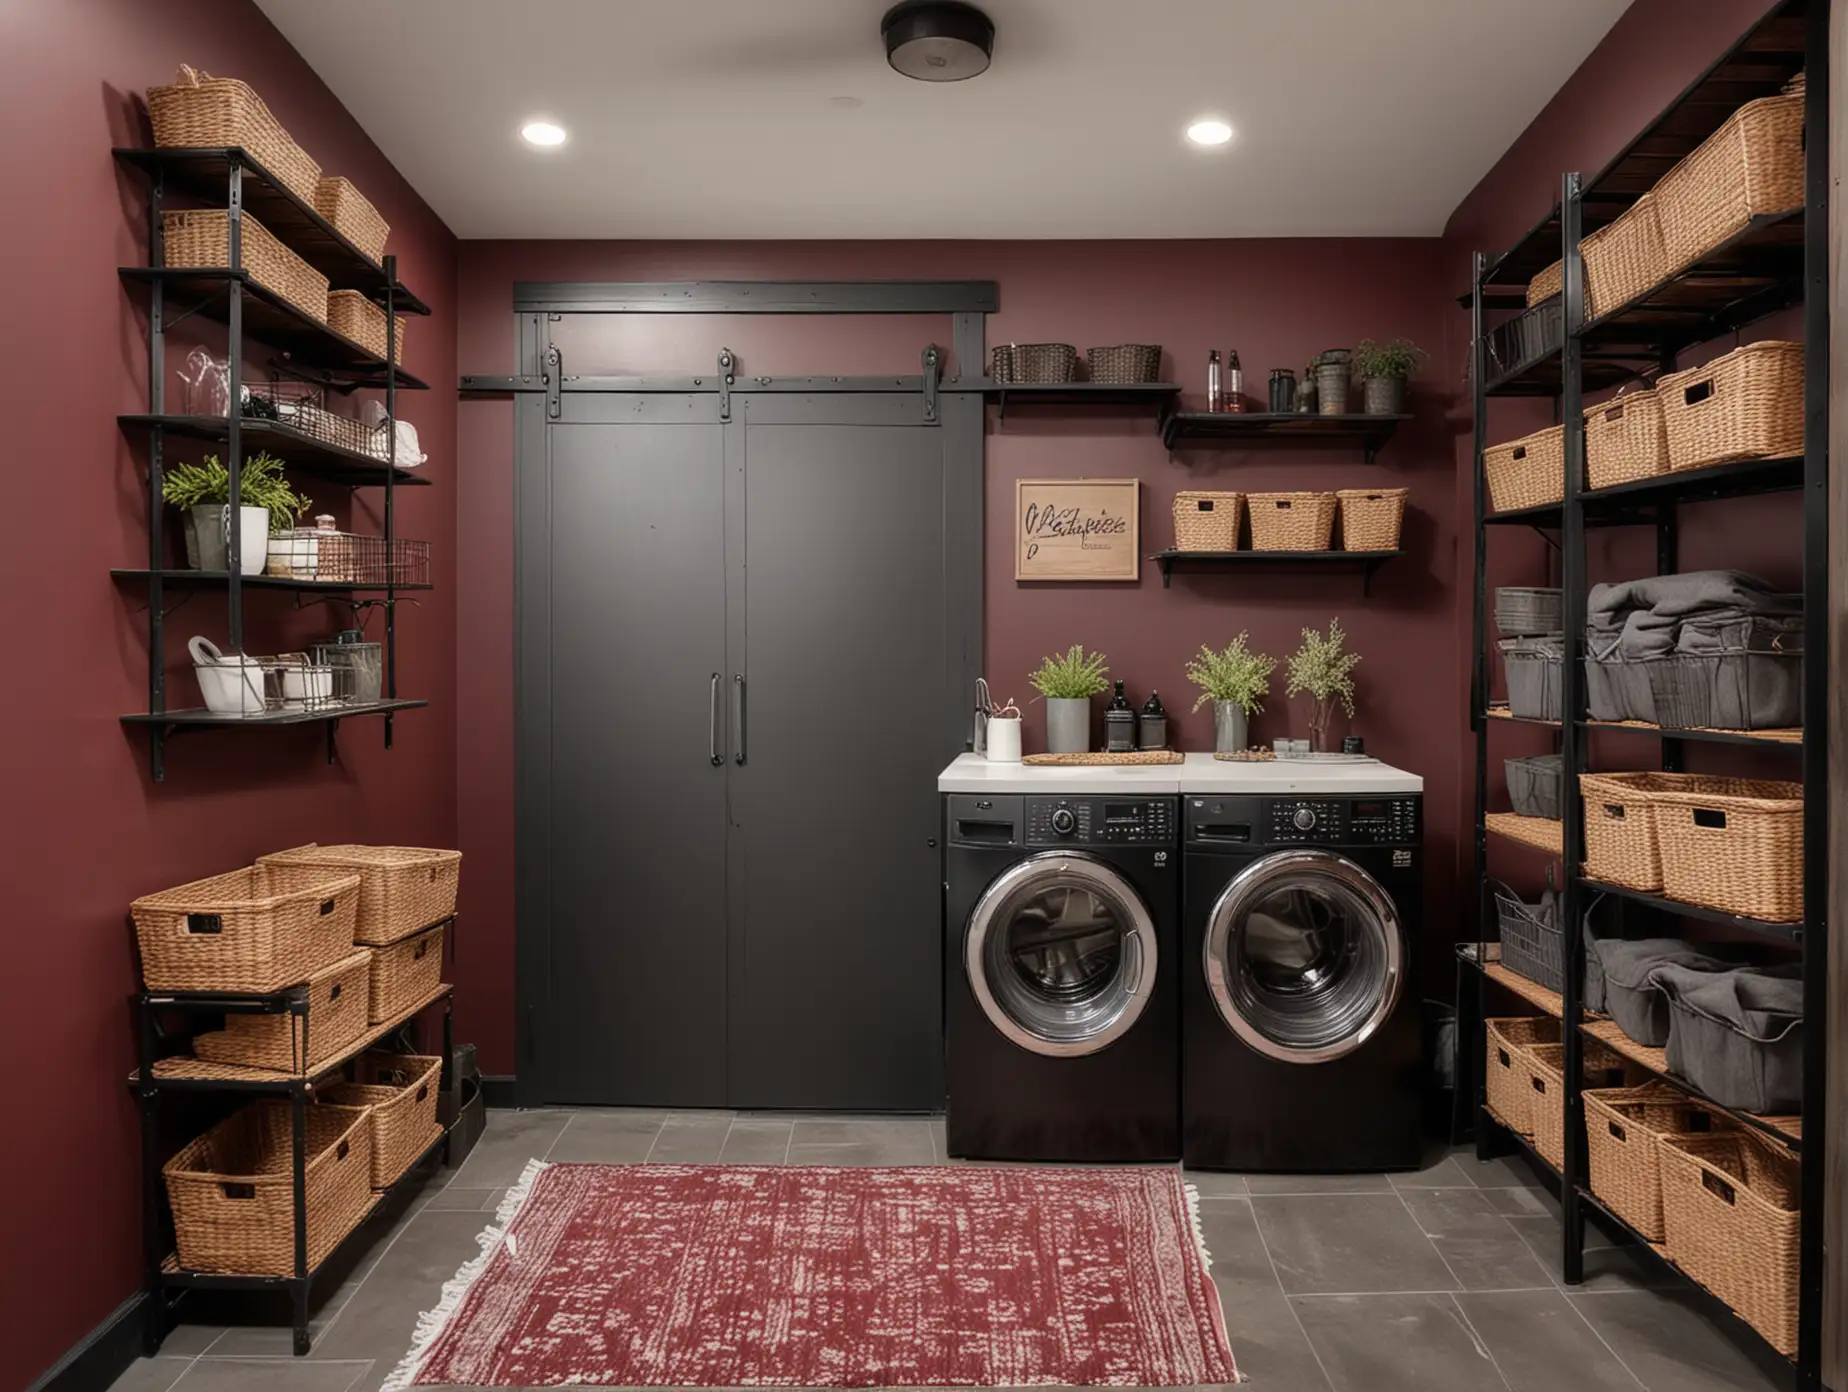 Generate a wide shot of a modern laundry room with burgundy accent walls, industrial metal shelving, wicker baskets for laundry storage, and a rolling barn door with a sleek black finish."



